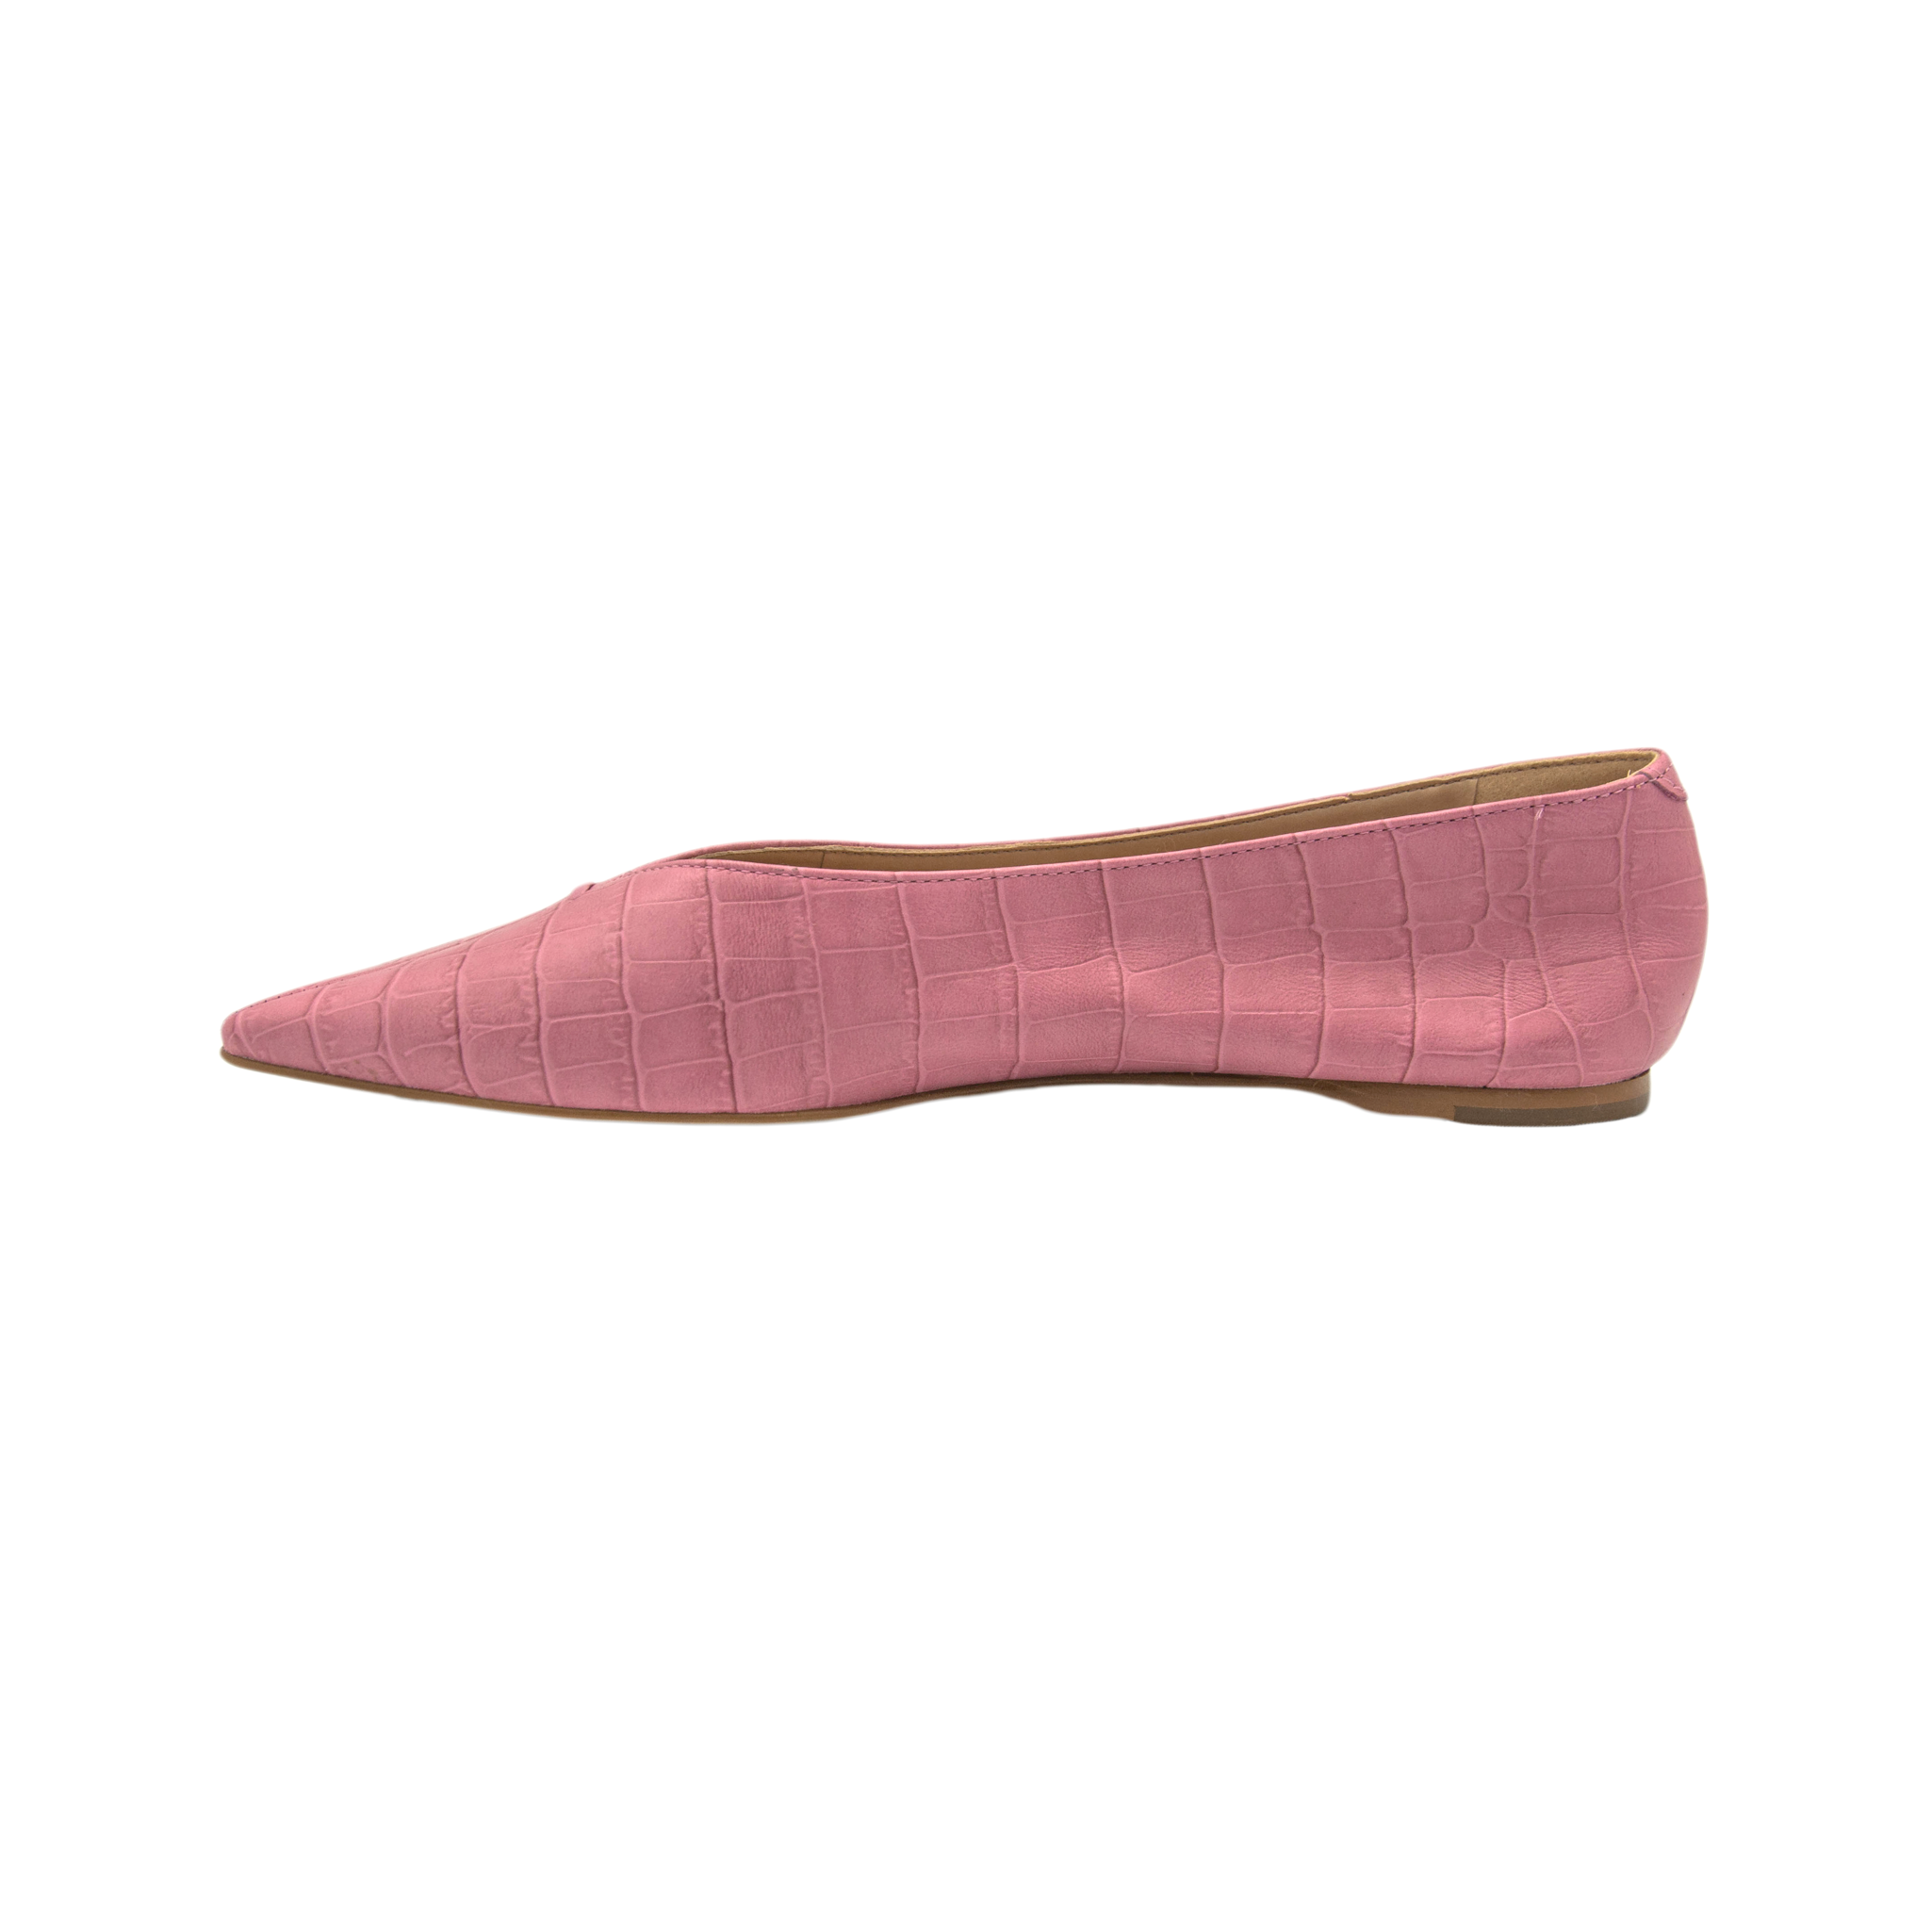 Grove Leather Flat Shoes - Gomma Flats TARBAY   